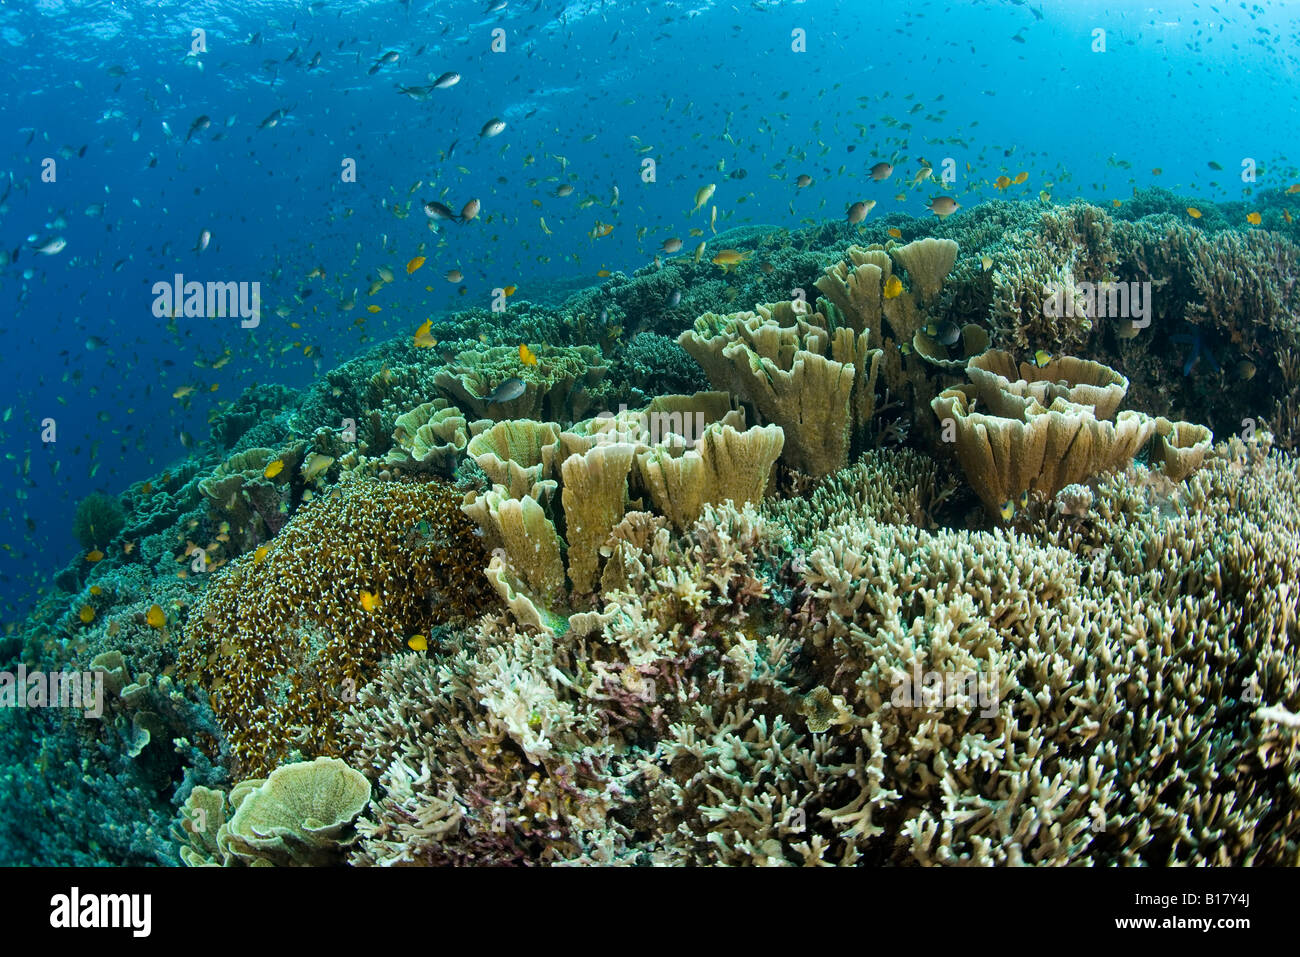 coral reef with hard corals Echinopora sp Maolboal Cebu Philippines Stock Photo